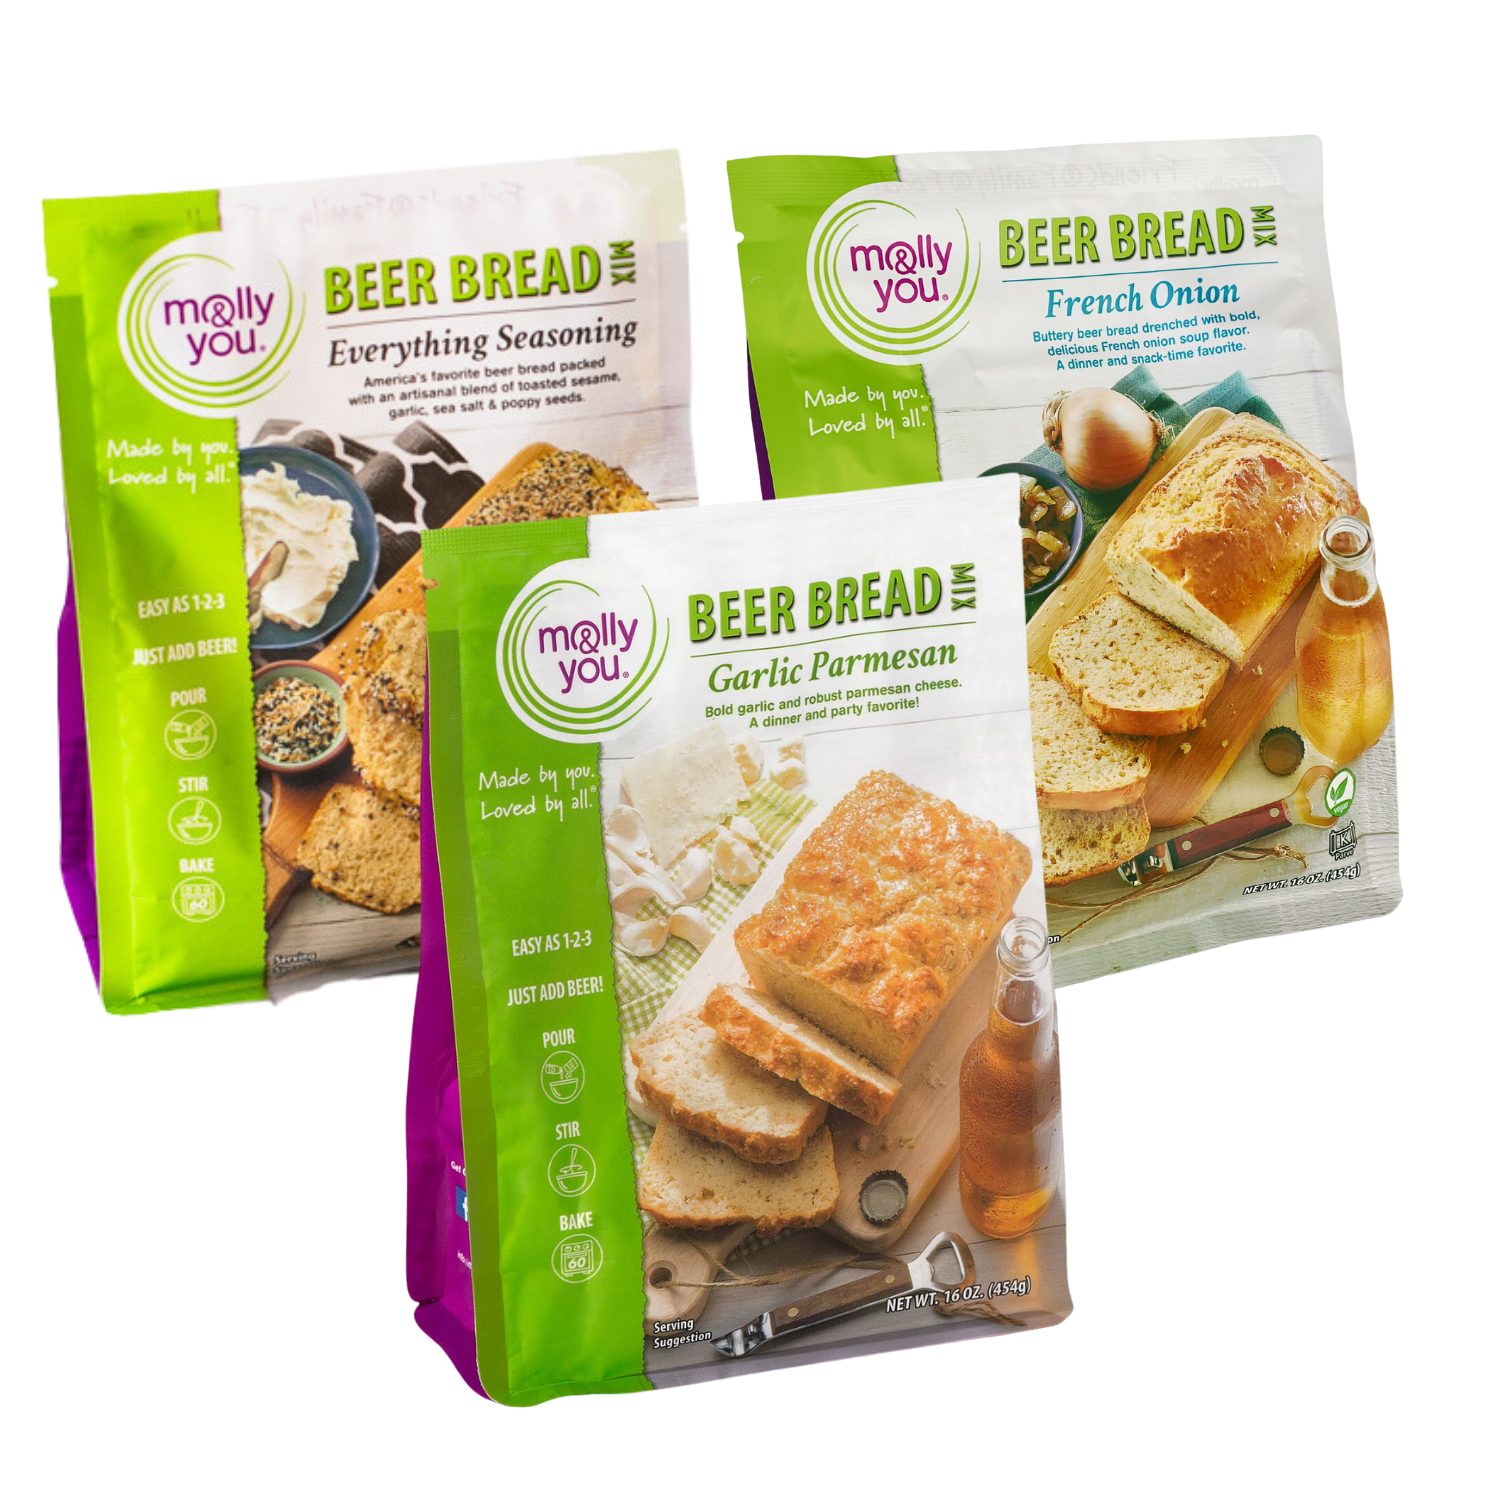 Our top zesty beer bread mixes - Everything Seasoning, French Onion, and Garlic Parmesan Beer Bread Mix